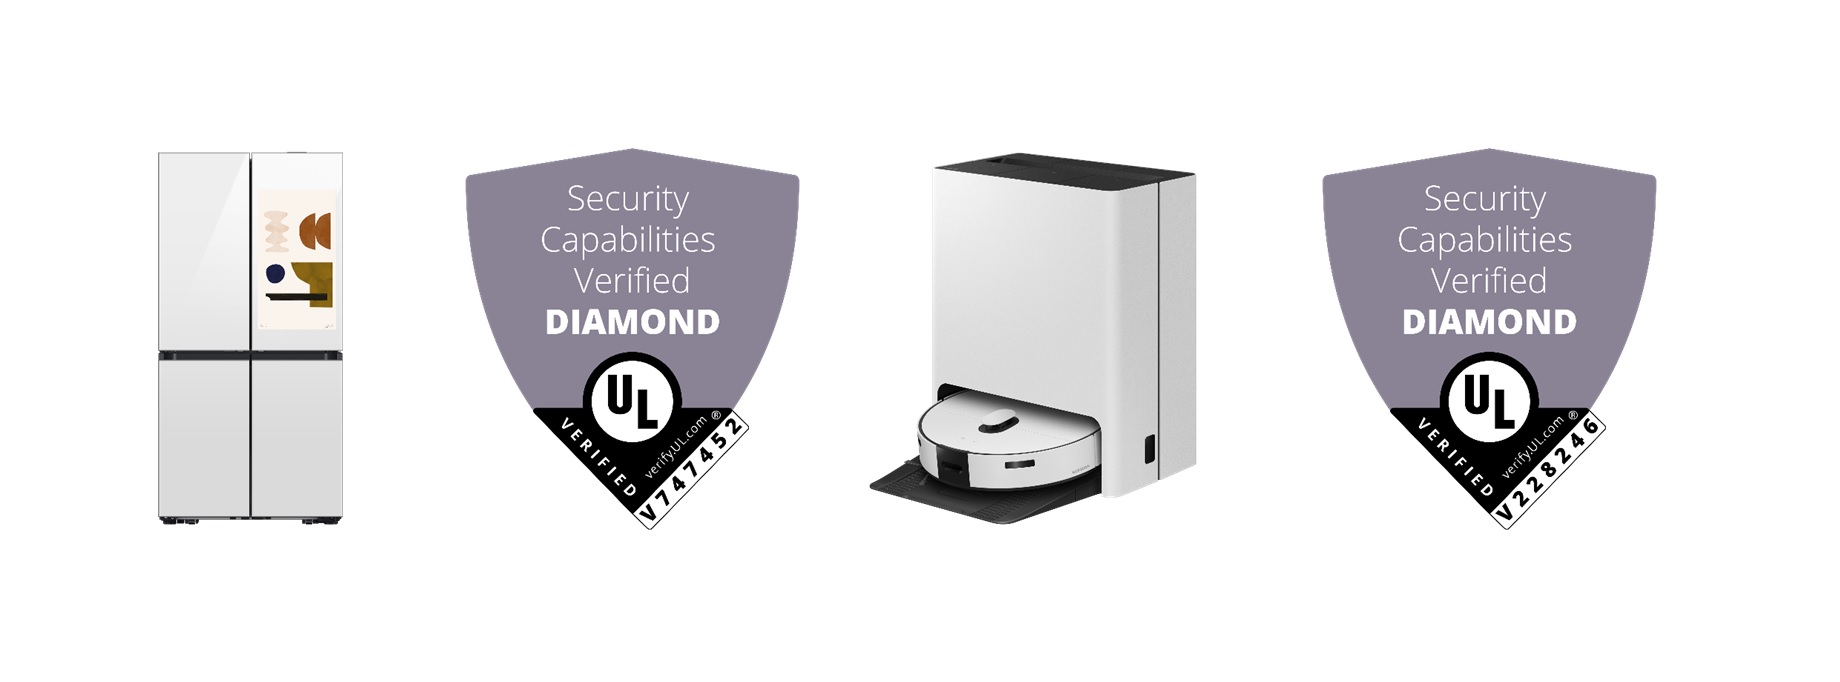 Samsung's Bespoke home appliances earn top IoT security rating from UL Solutions